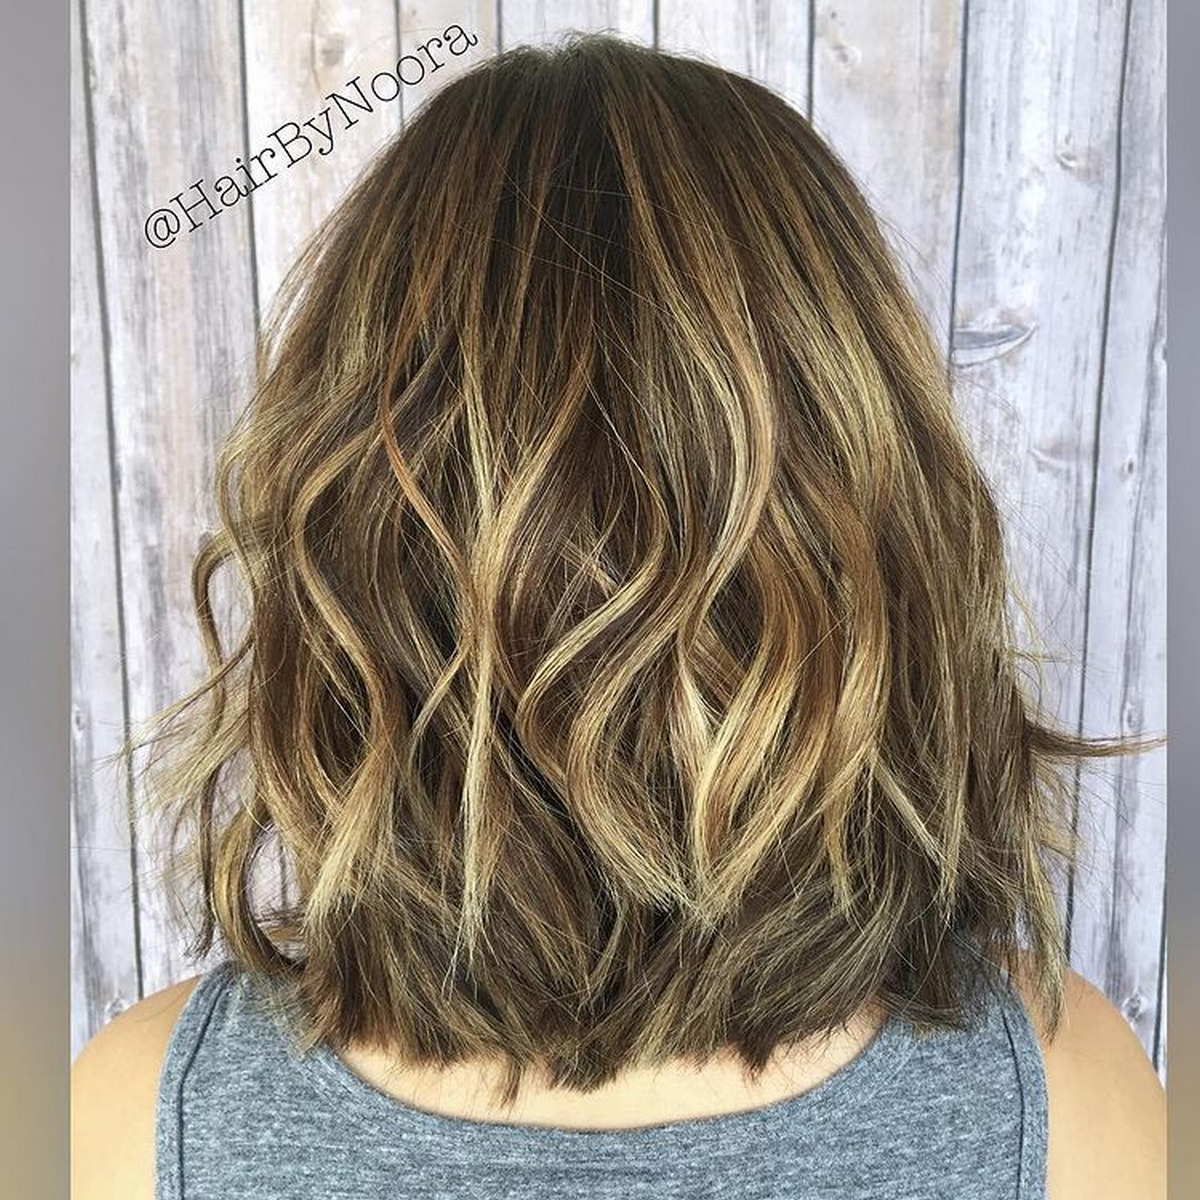 Textured Lob With Blonde Streaks